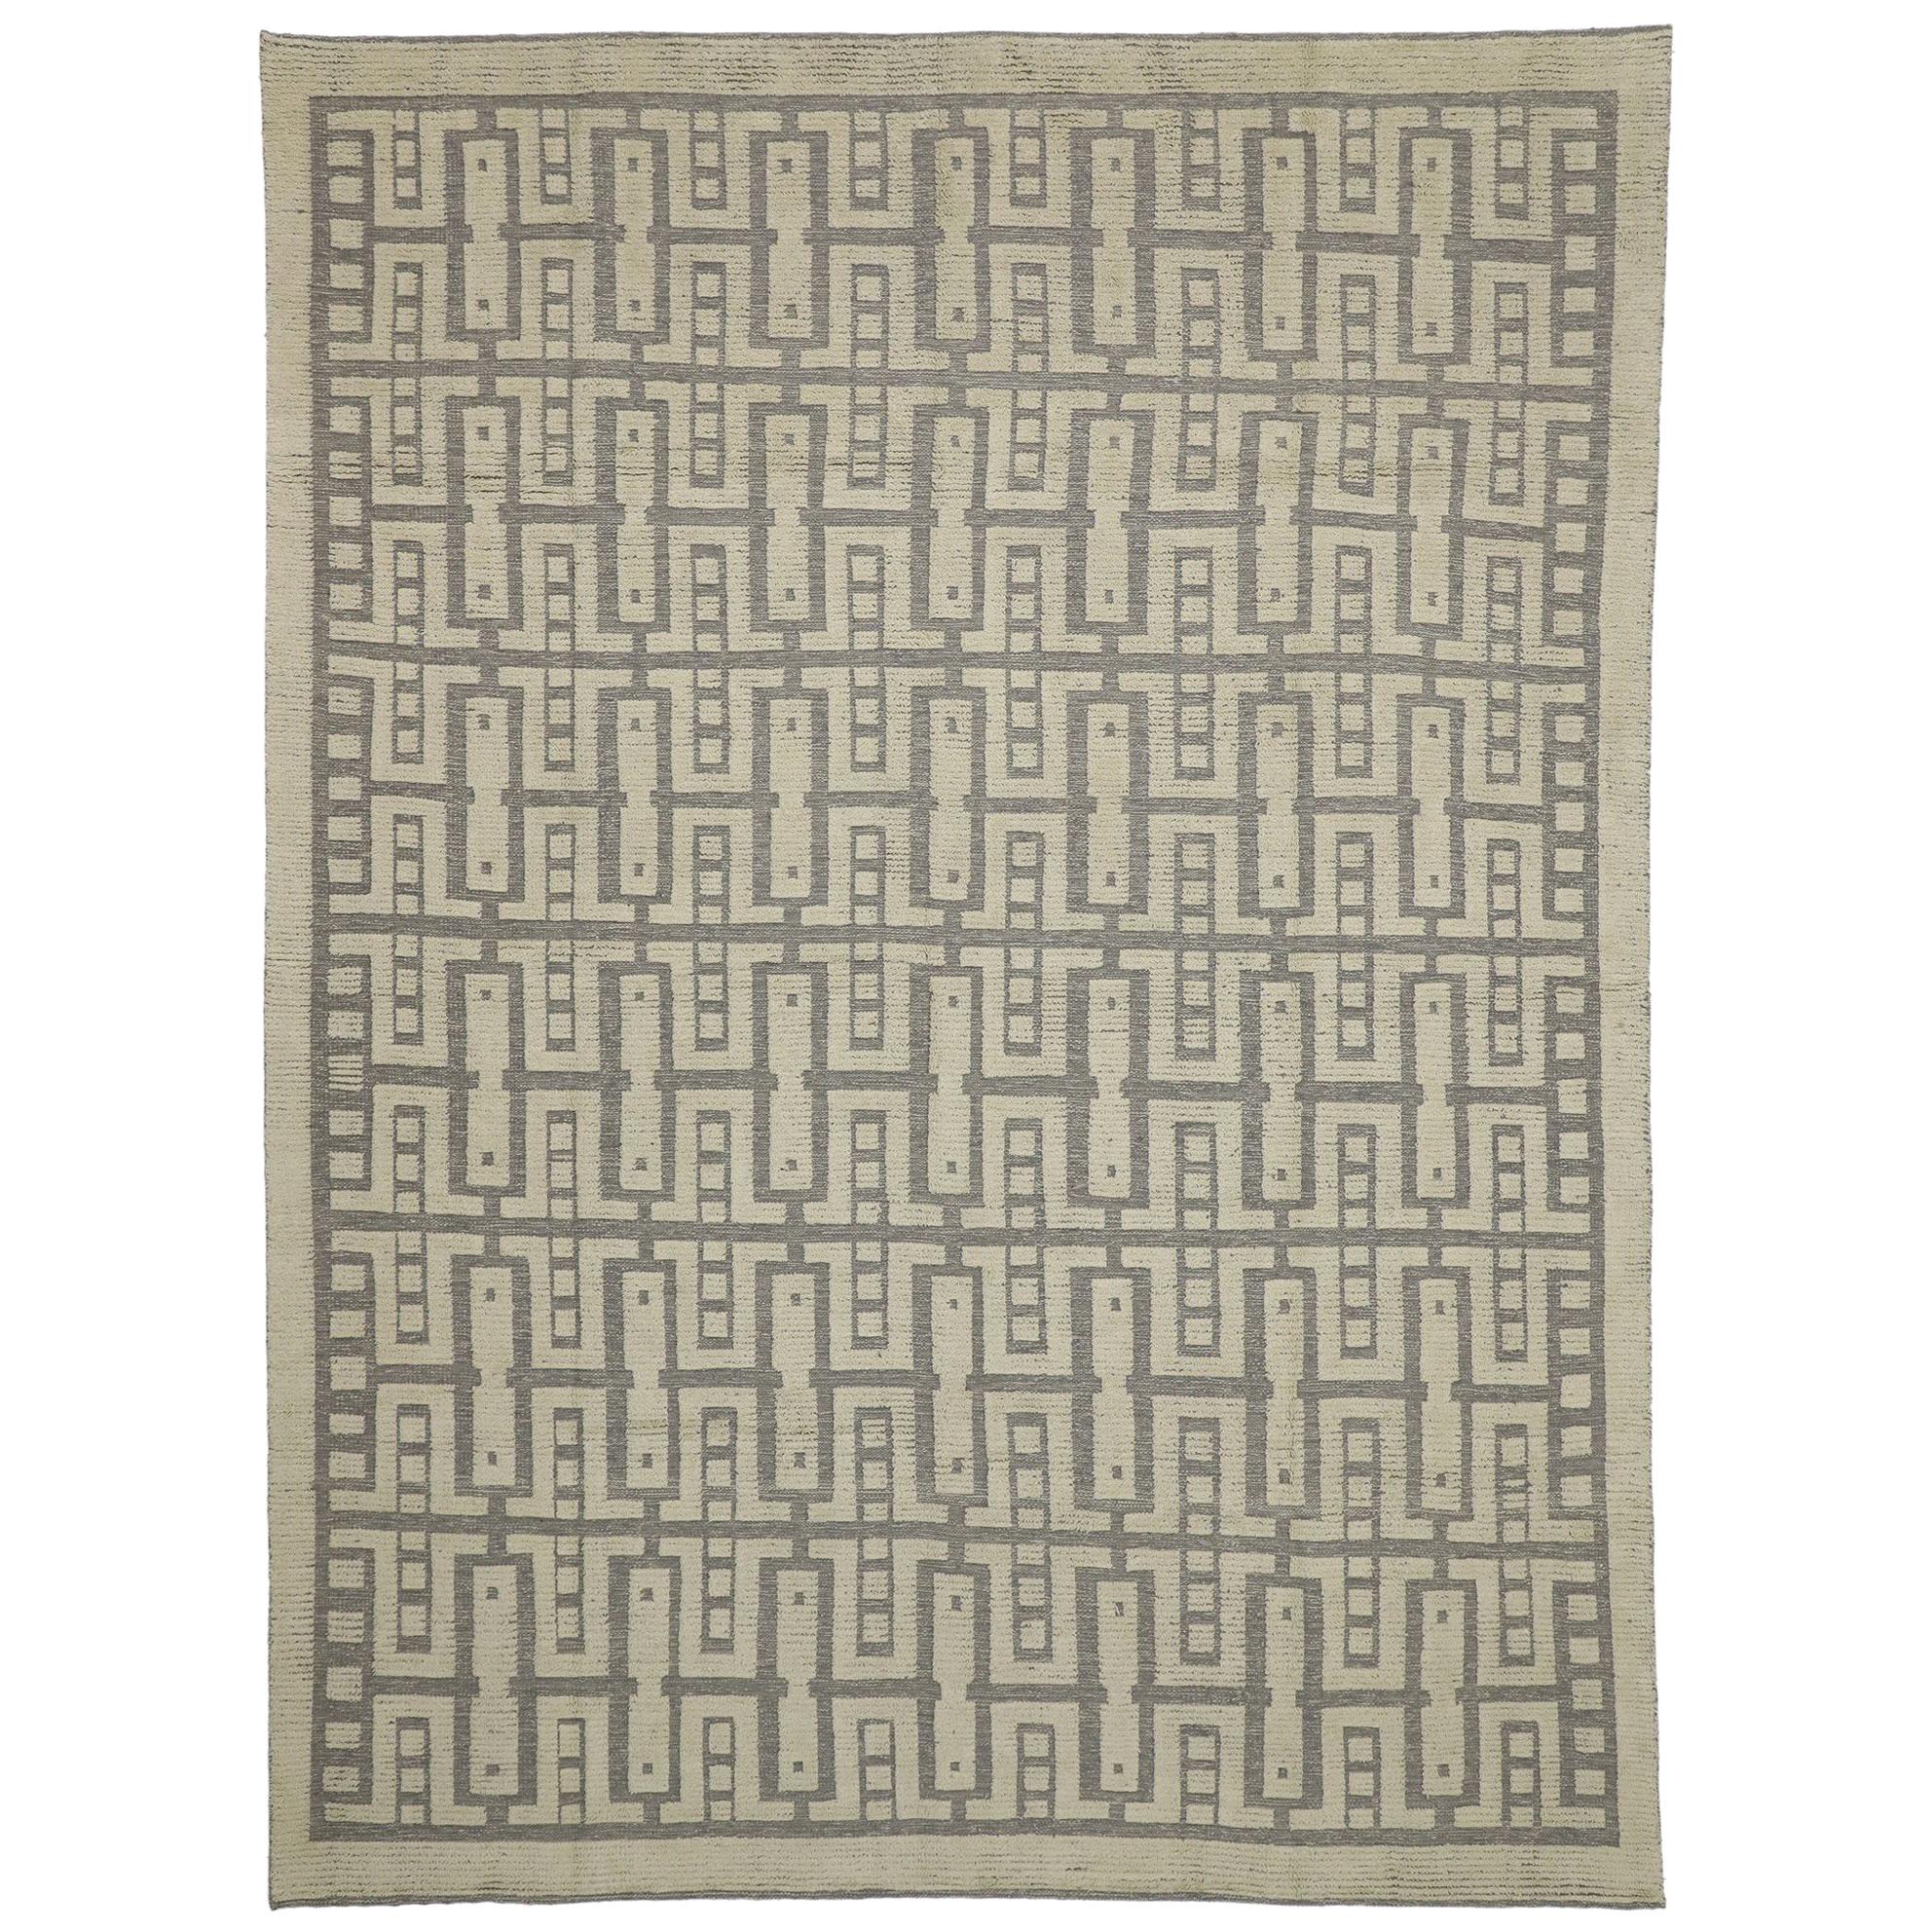 New Contemporary High-Low Geometric Rug with Transitional and Art Deco Style